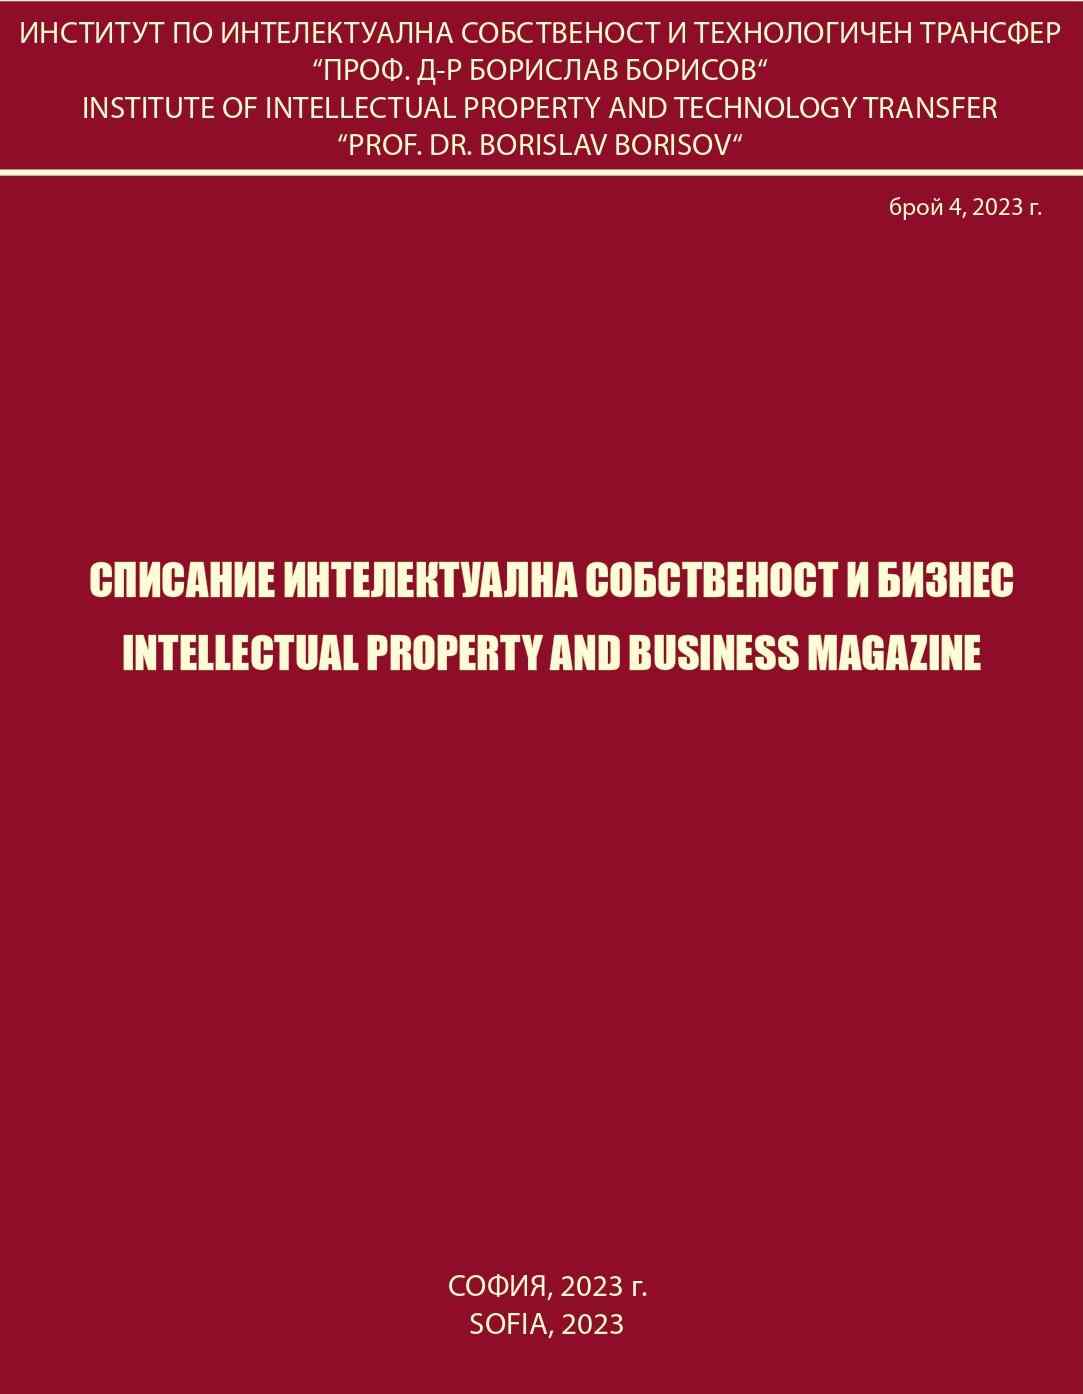 Geographical Indications as Objects of Intellectual Property - Essence and Types, Identification of Geographical Indications as a Business Factor Cover Image